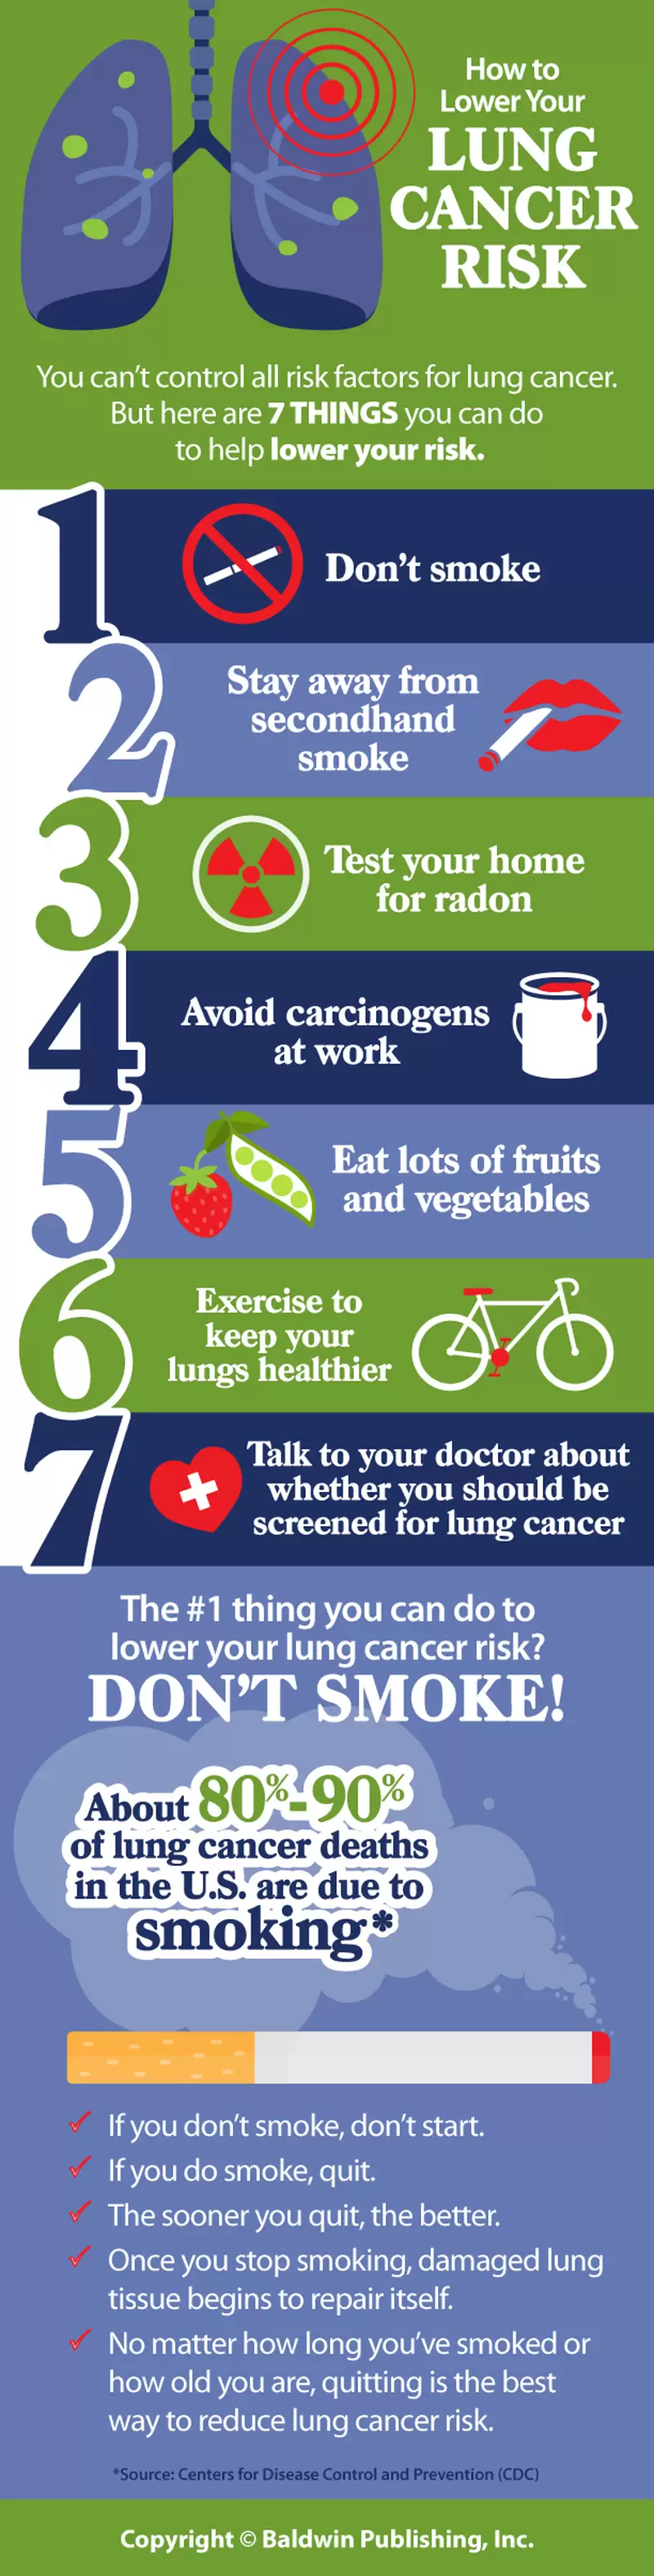 lung cancer risk infographic